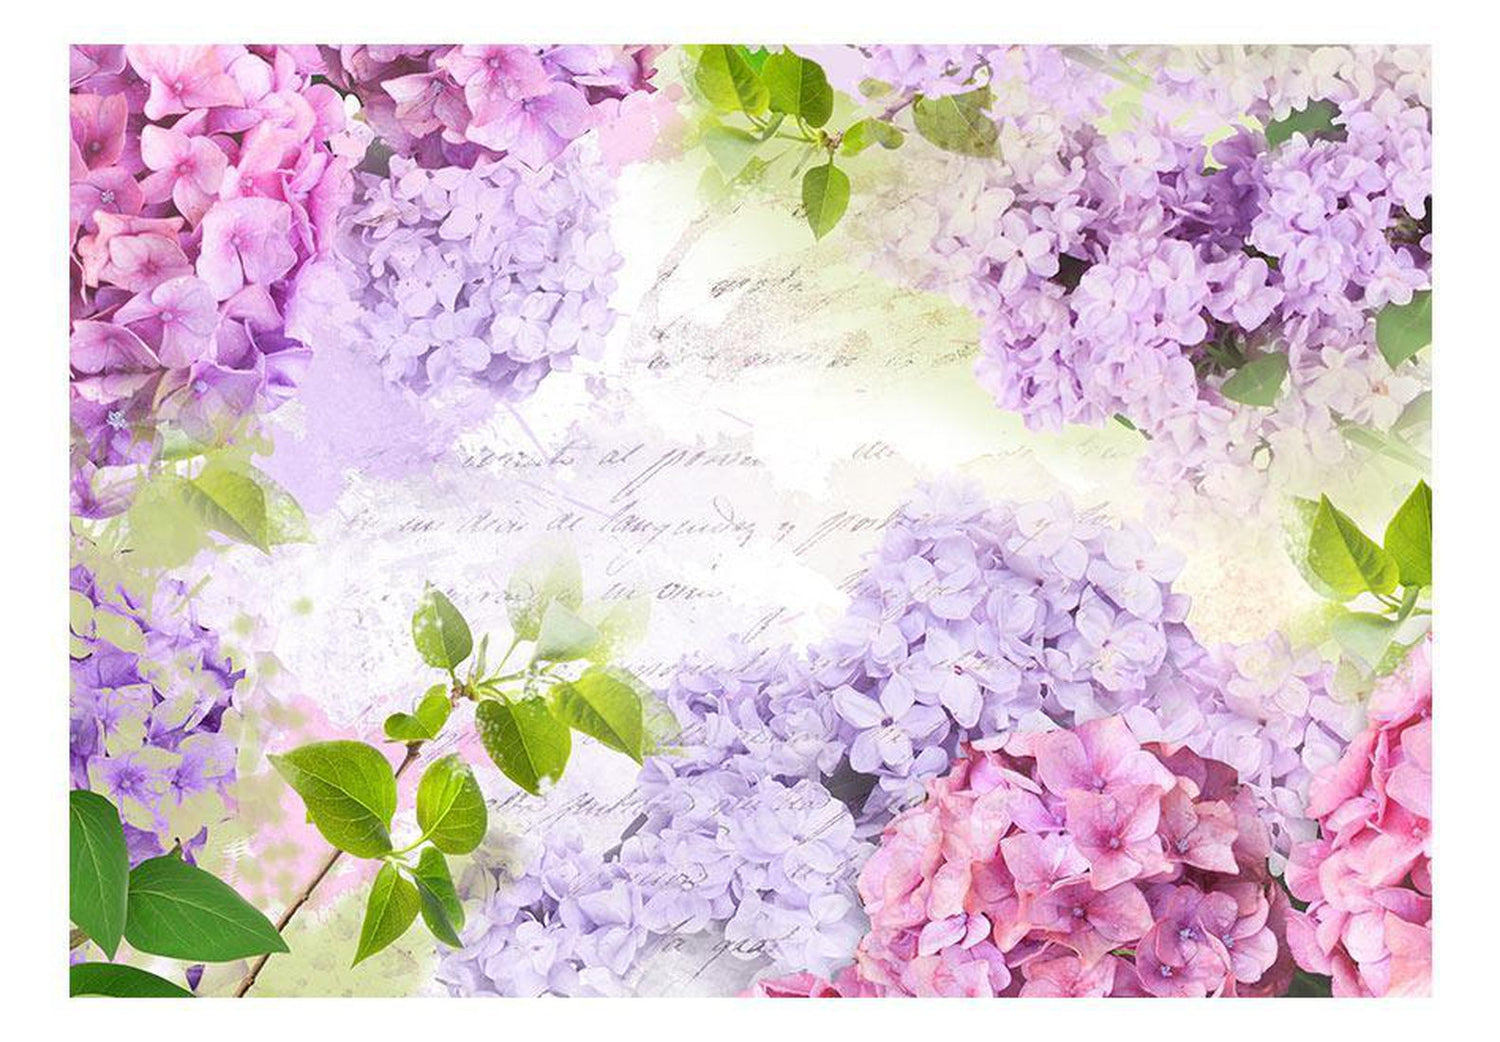 Peel and stick wall mural - May's lilacs-TipTopHomeDecor